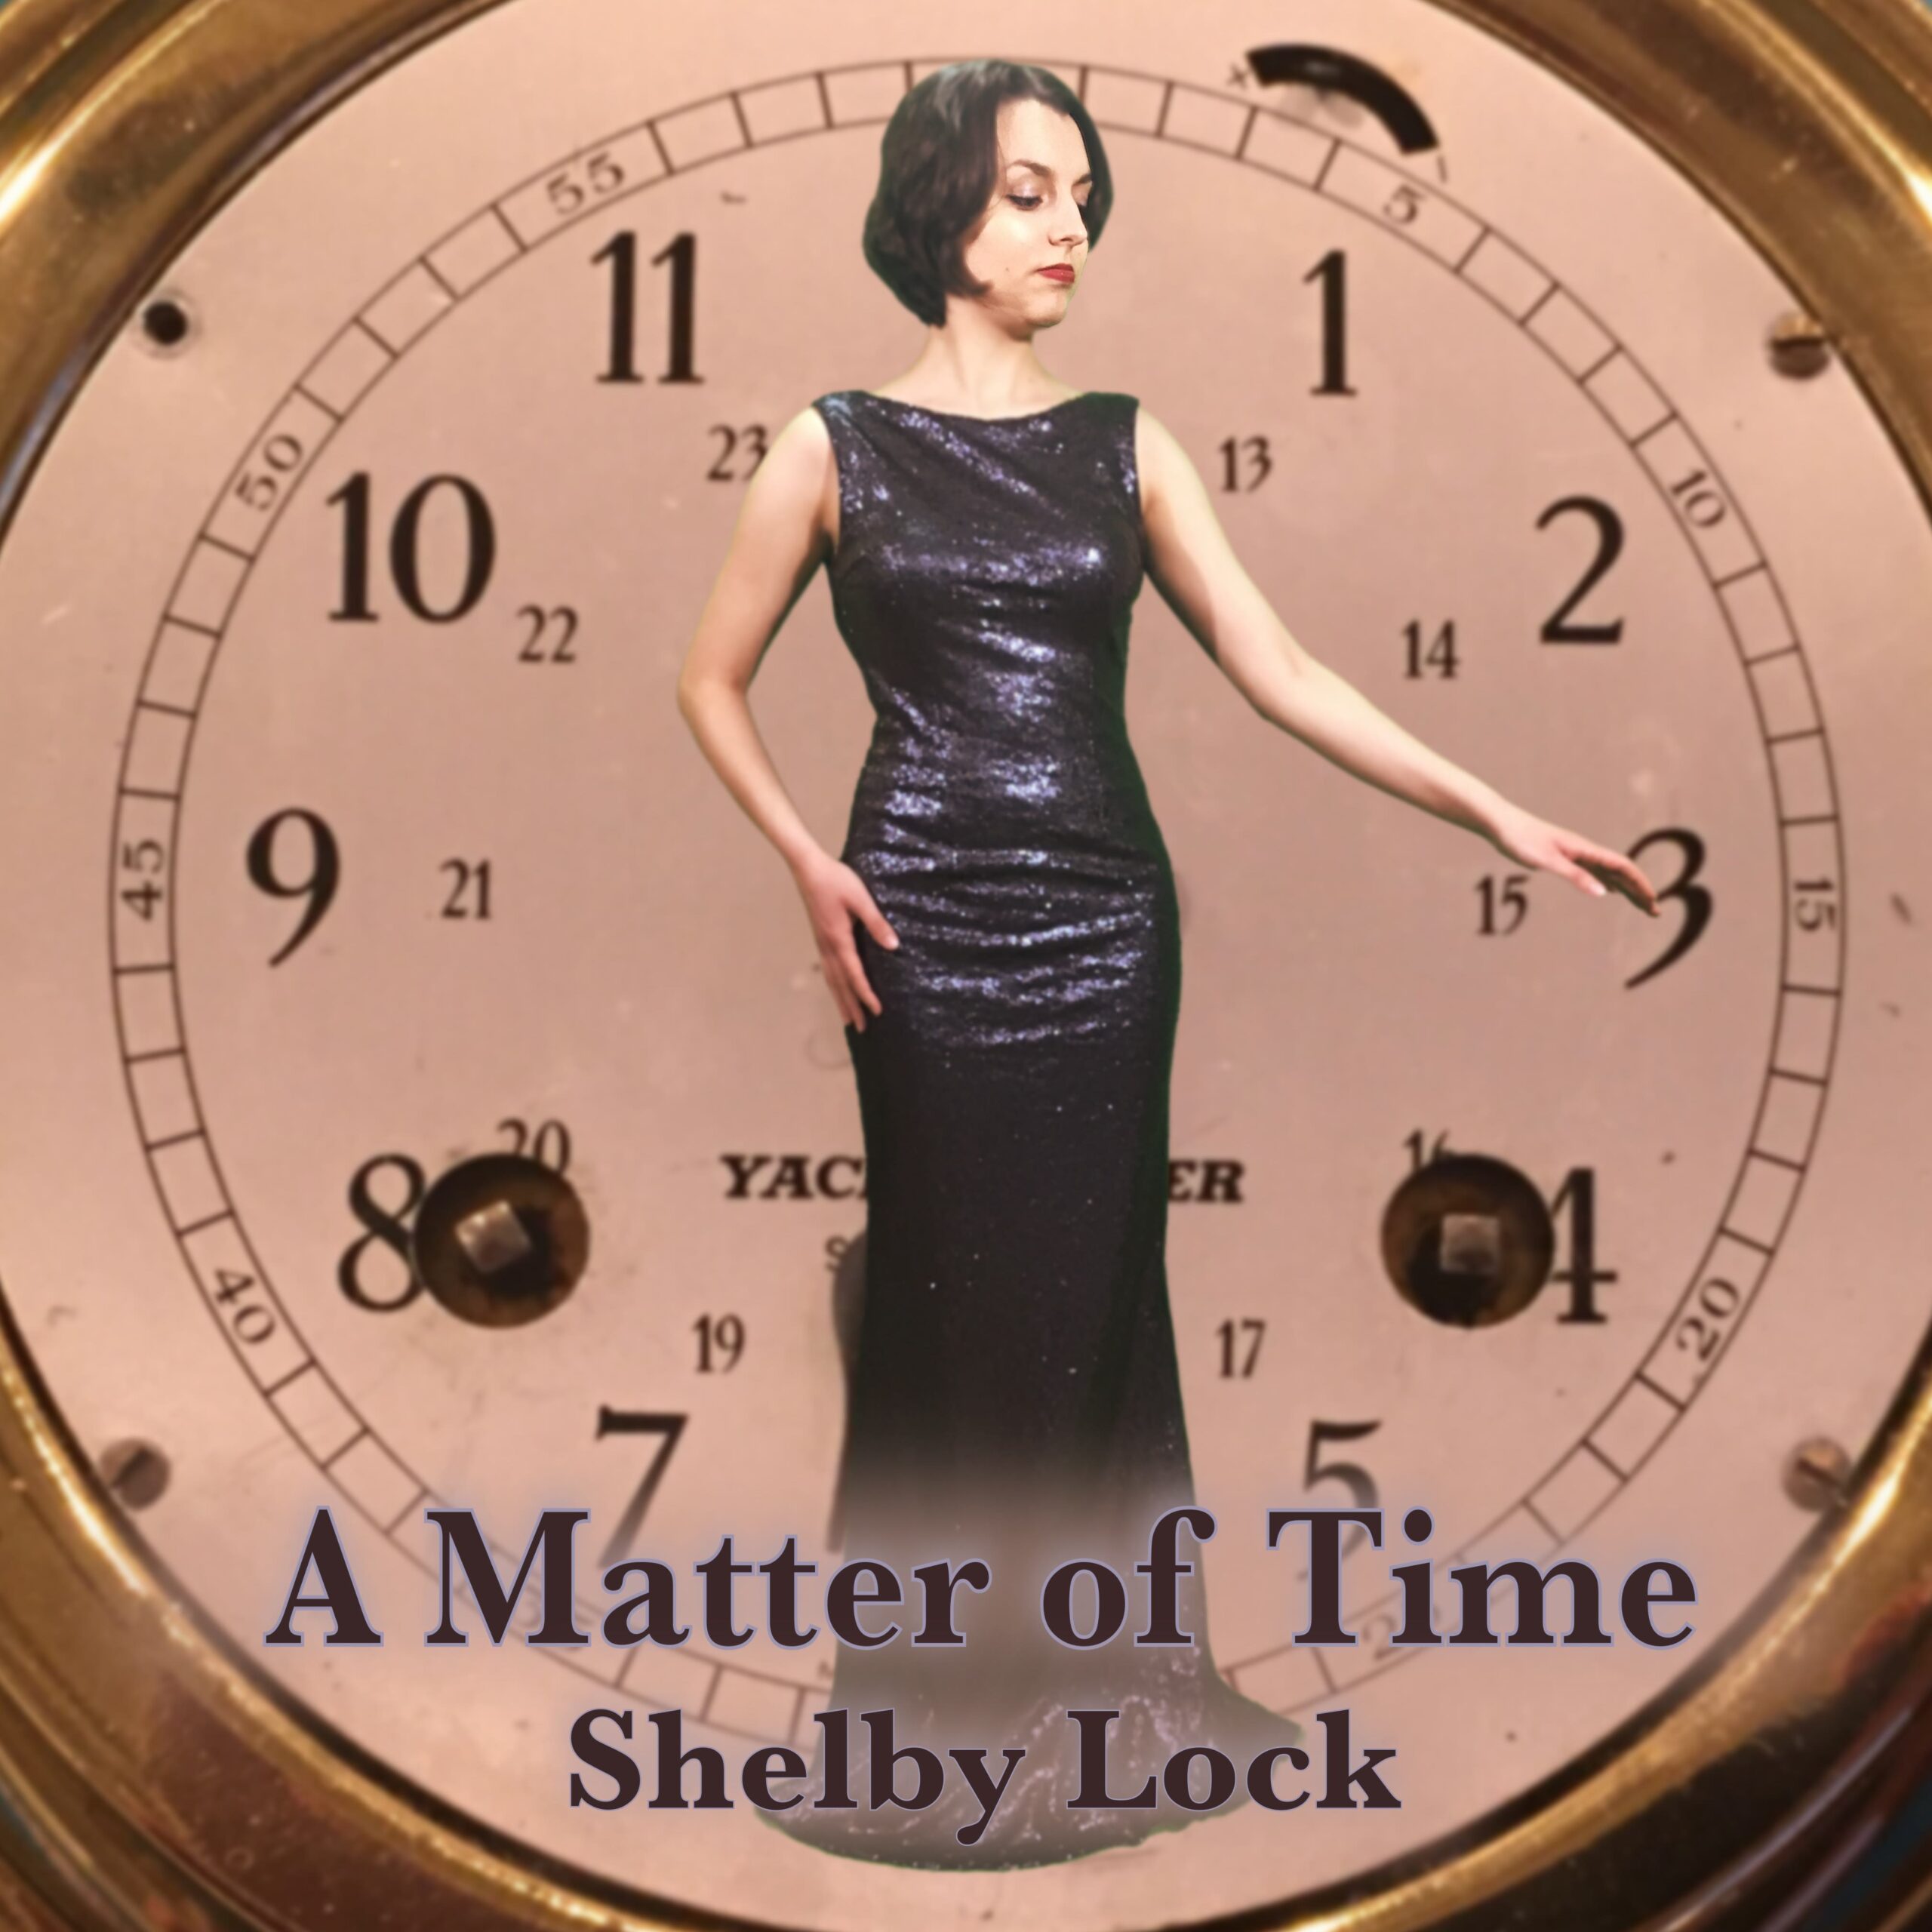 A Matter of Time by Shelby Lock, album art